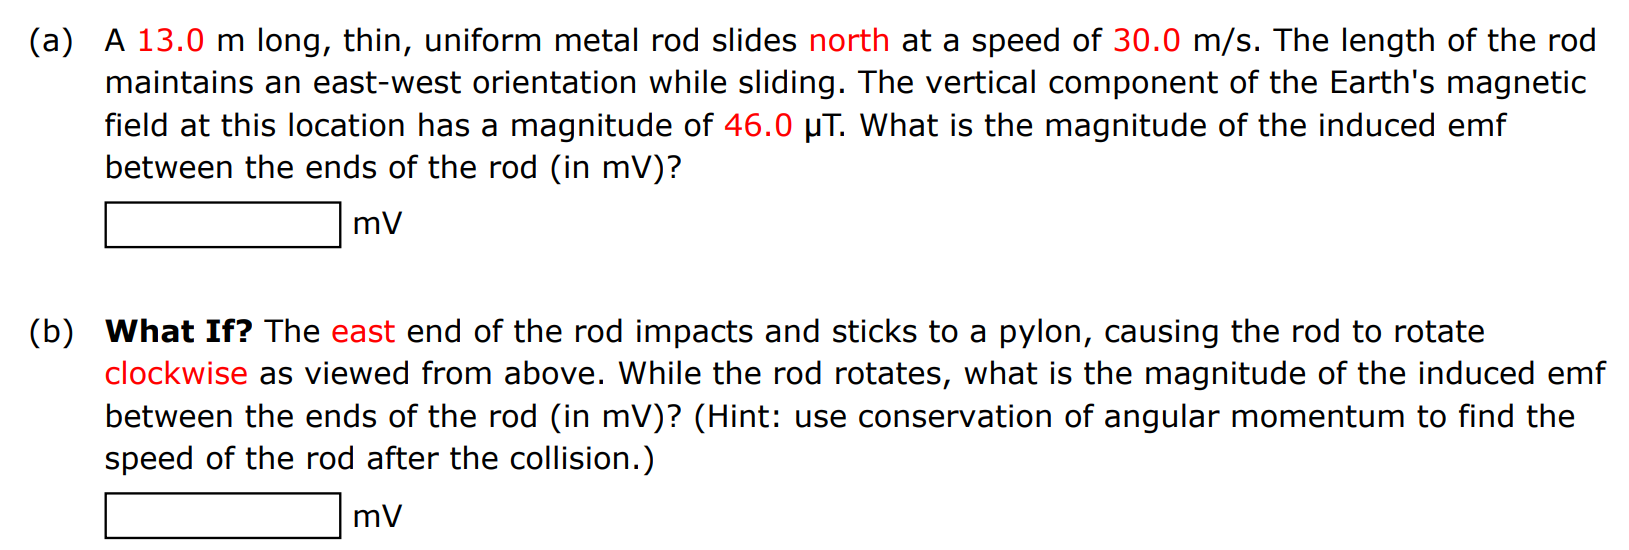 (a) A 13.0 m long, thin, uniform metal rod slides north at a speed of 30.0 m/s. The length of the rod maintains an east-west orientation while sliding. The vertical component of the Earth's magnetic field at this location has a magnitude of 46.0 μT. What is the magnitude of the induced emf between the ends of the rod (in mV)? mV (b) What If? The east end of the rod impacts and sticks to a pylon, causing the rod to rotate clockwise as viewed from above. While the rod rotates, what is the magnitude of the induced emf between the ends of the rod (in mV)? (Hint: use conservation of angular momentum to find the speed of the rod after the collision.) mV 